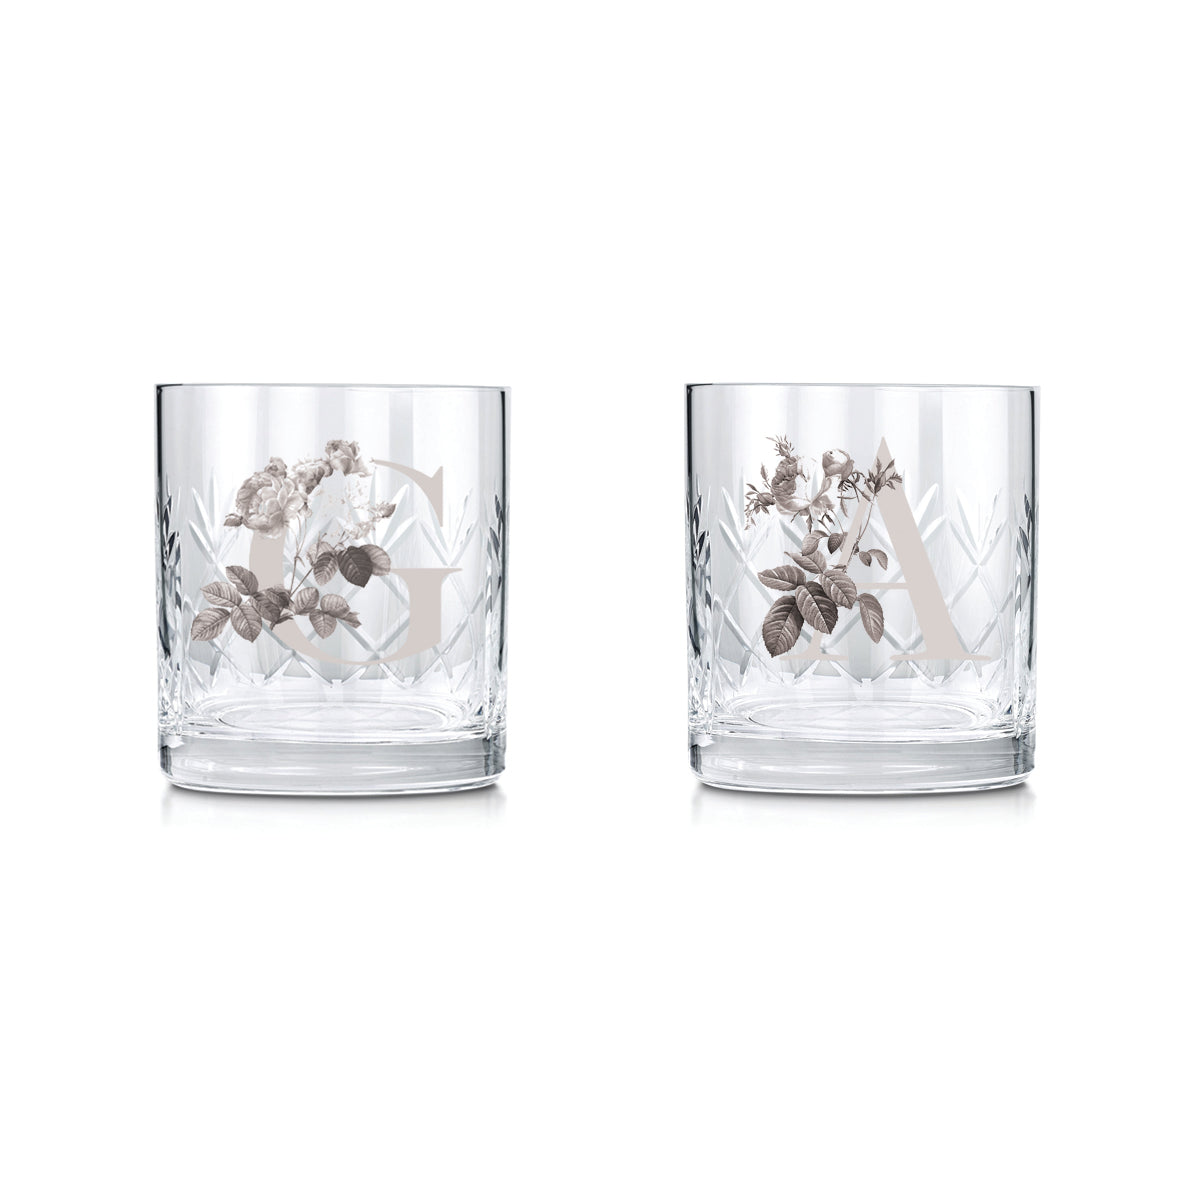 Engraved Cut Glass Tumblers With A Botanical Styles Initial